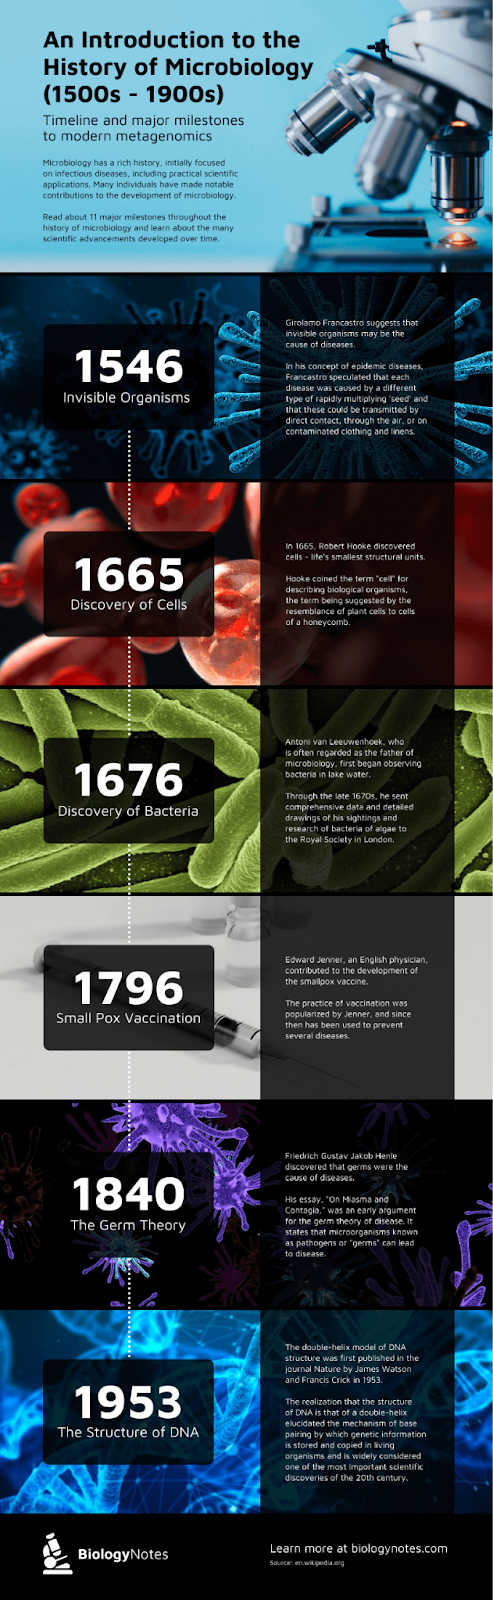 6 Microbiology Milestones Timeline Infographic Template
